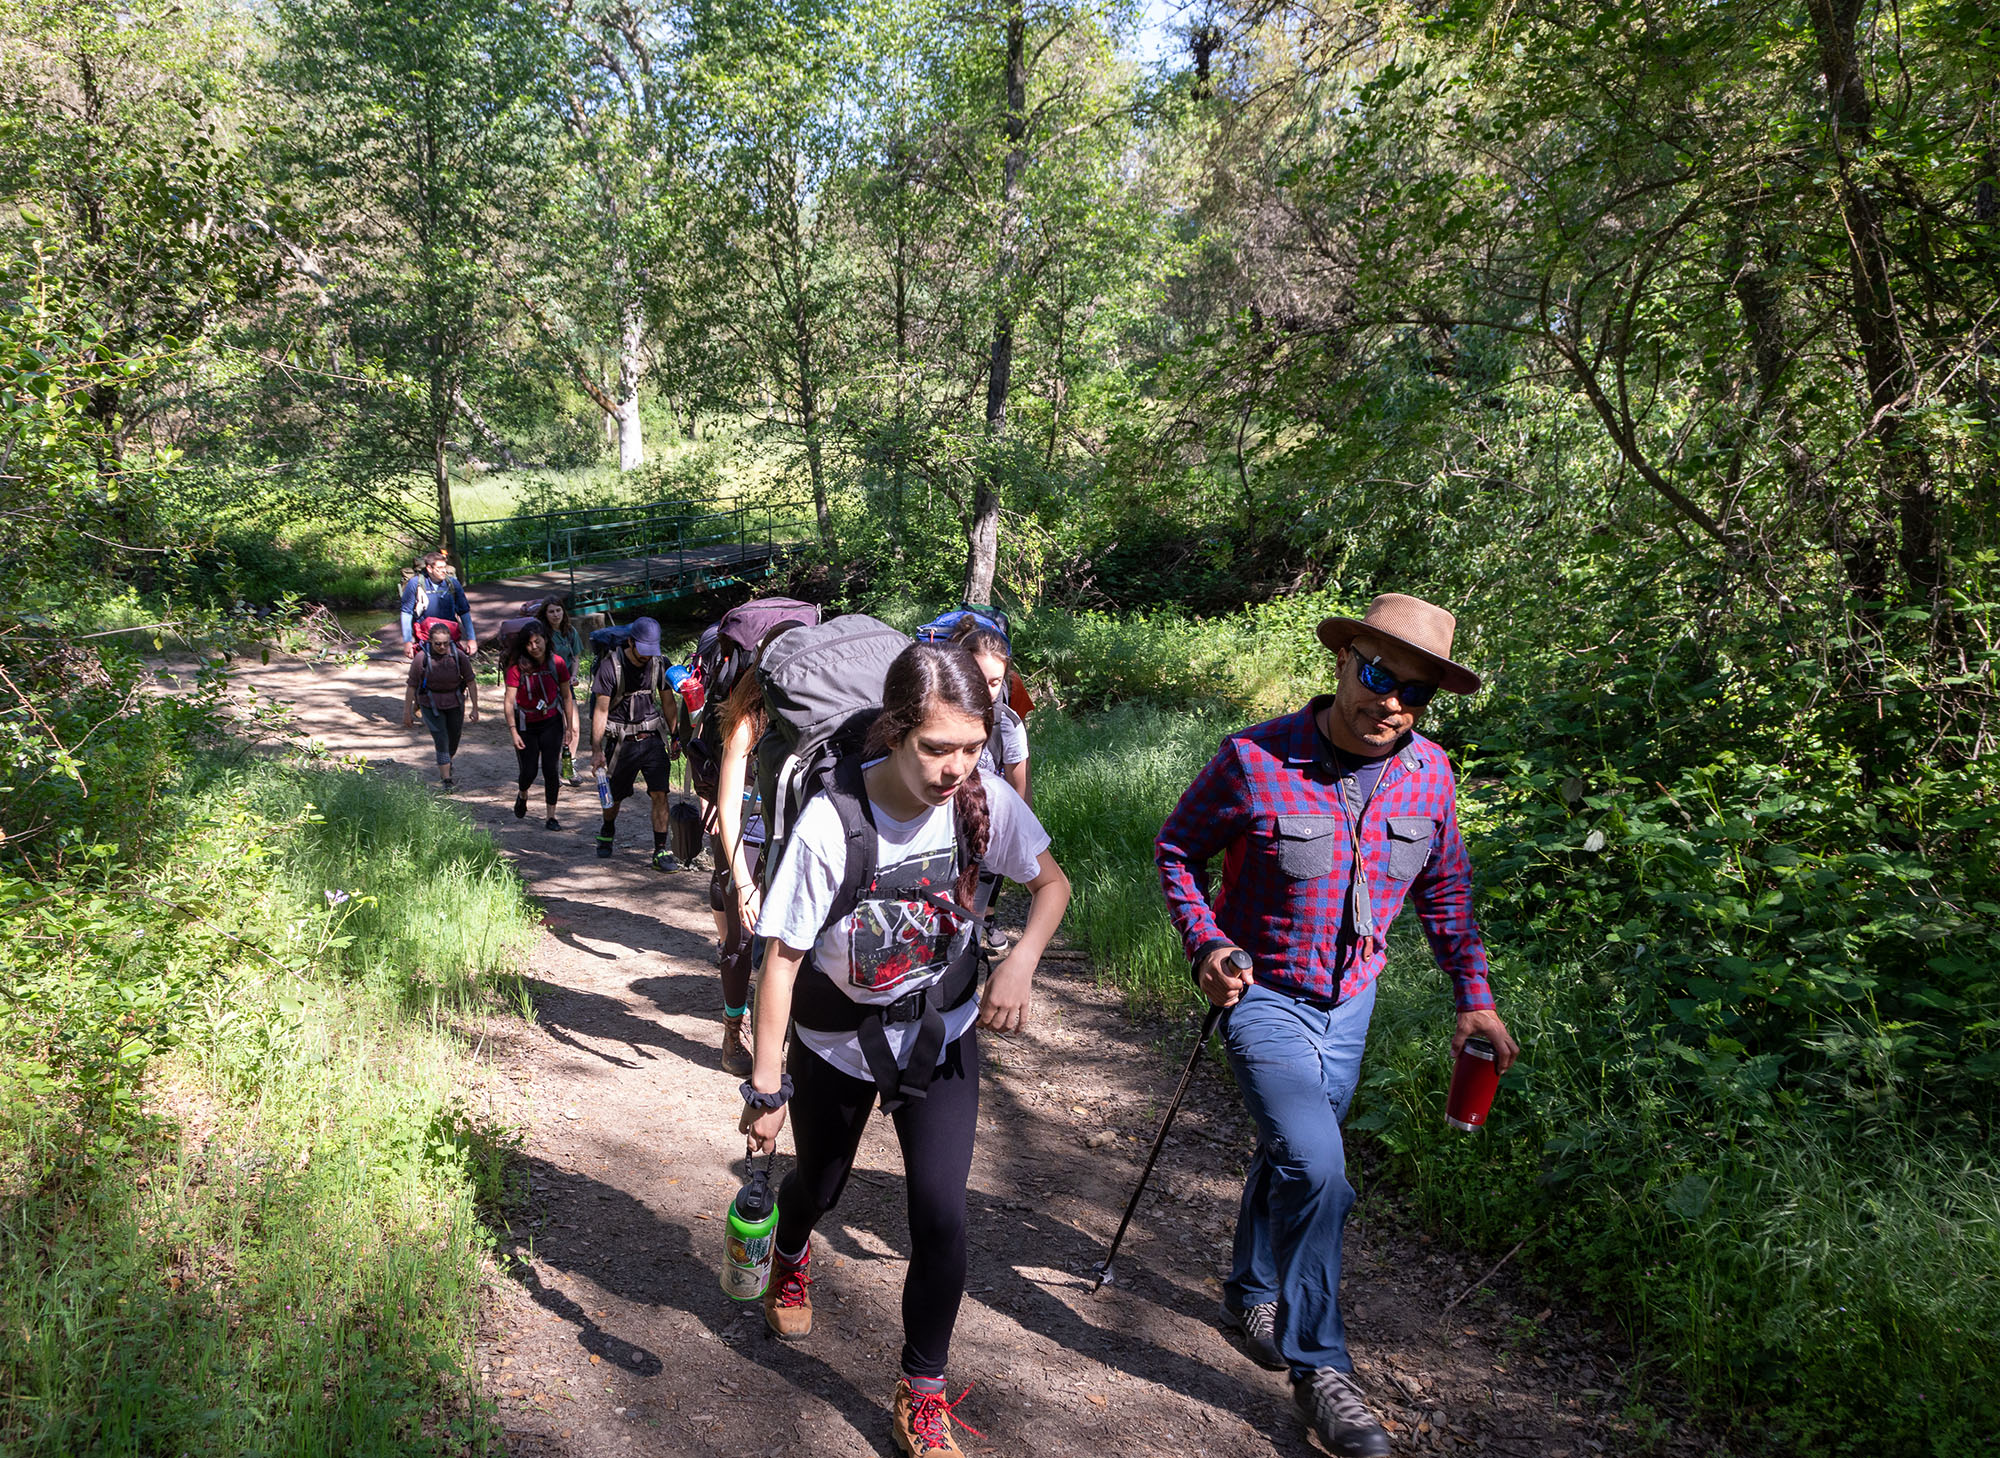 Students backpacking in the outdoors as part of the Recreation Management program at Sierra College